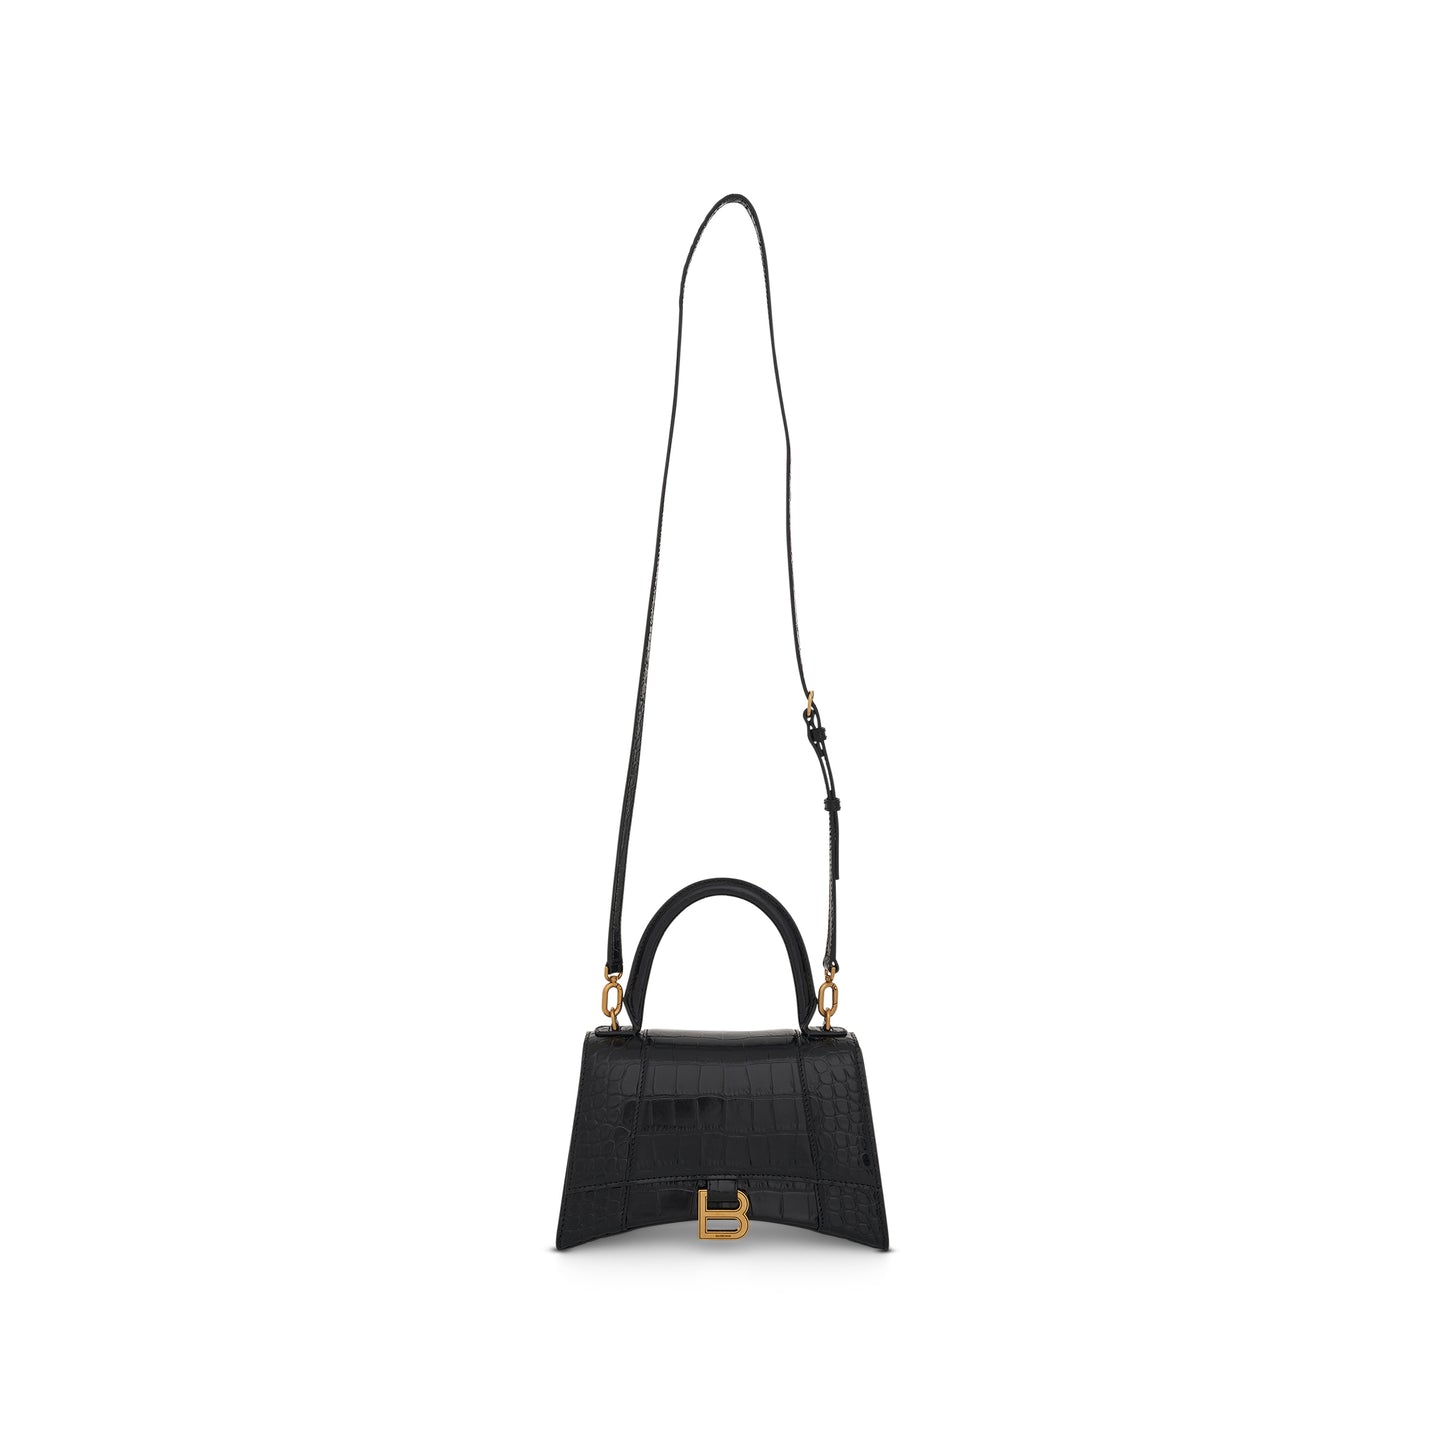 Hourglass Small Croco Embossed Bag in Black with Gold Plague